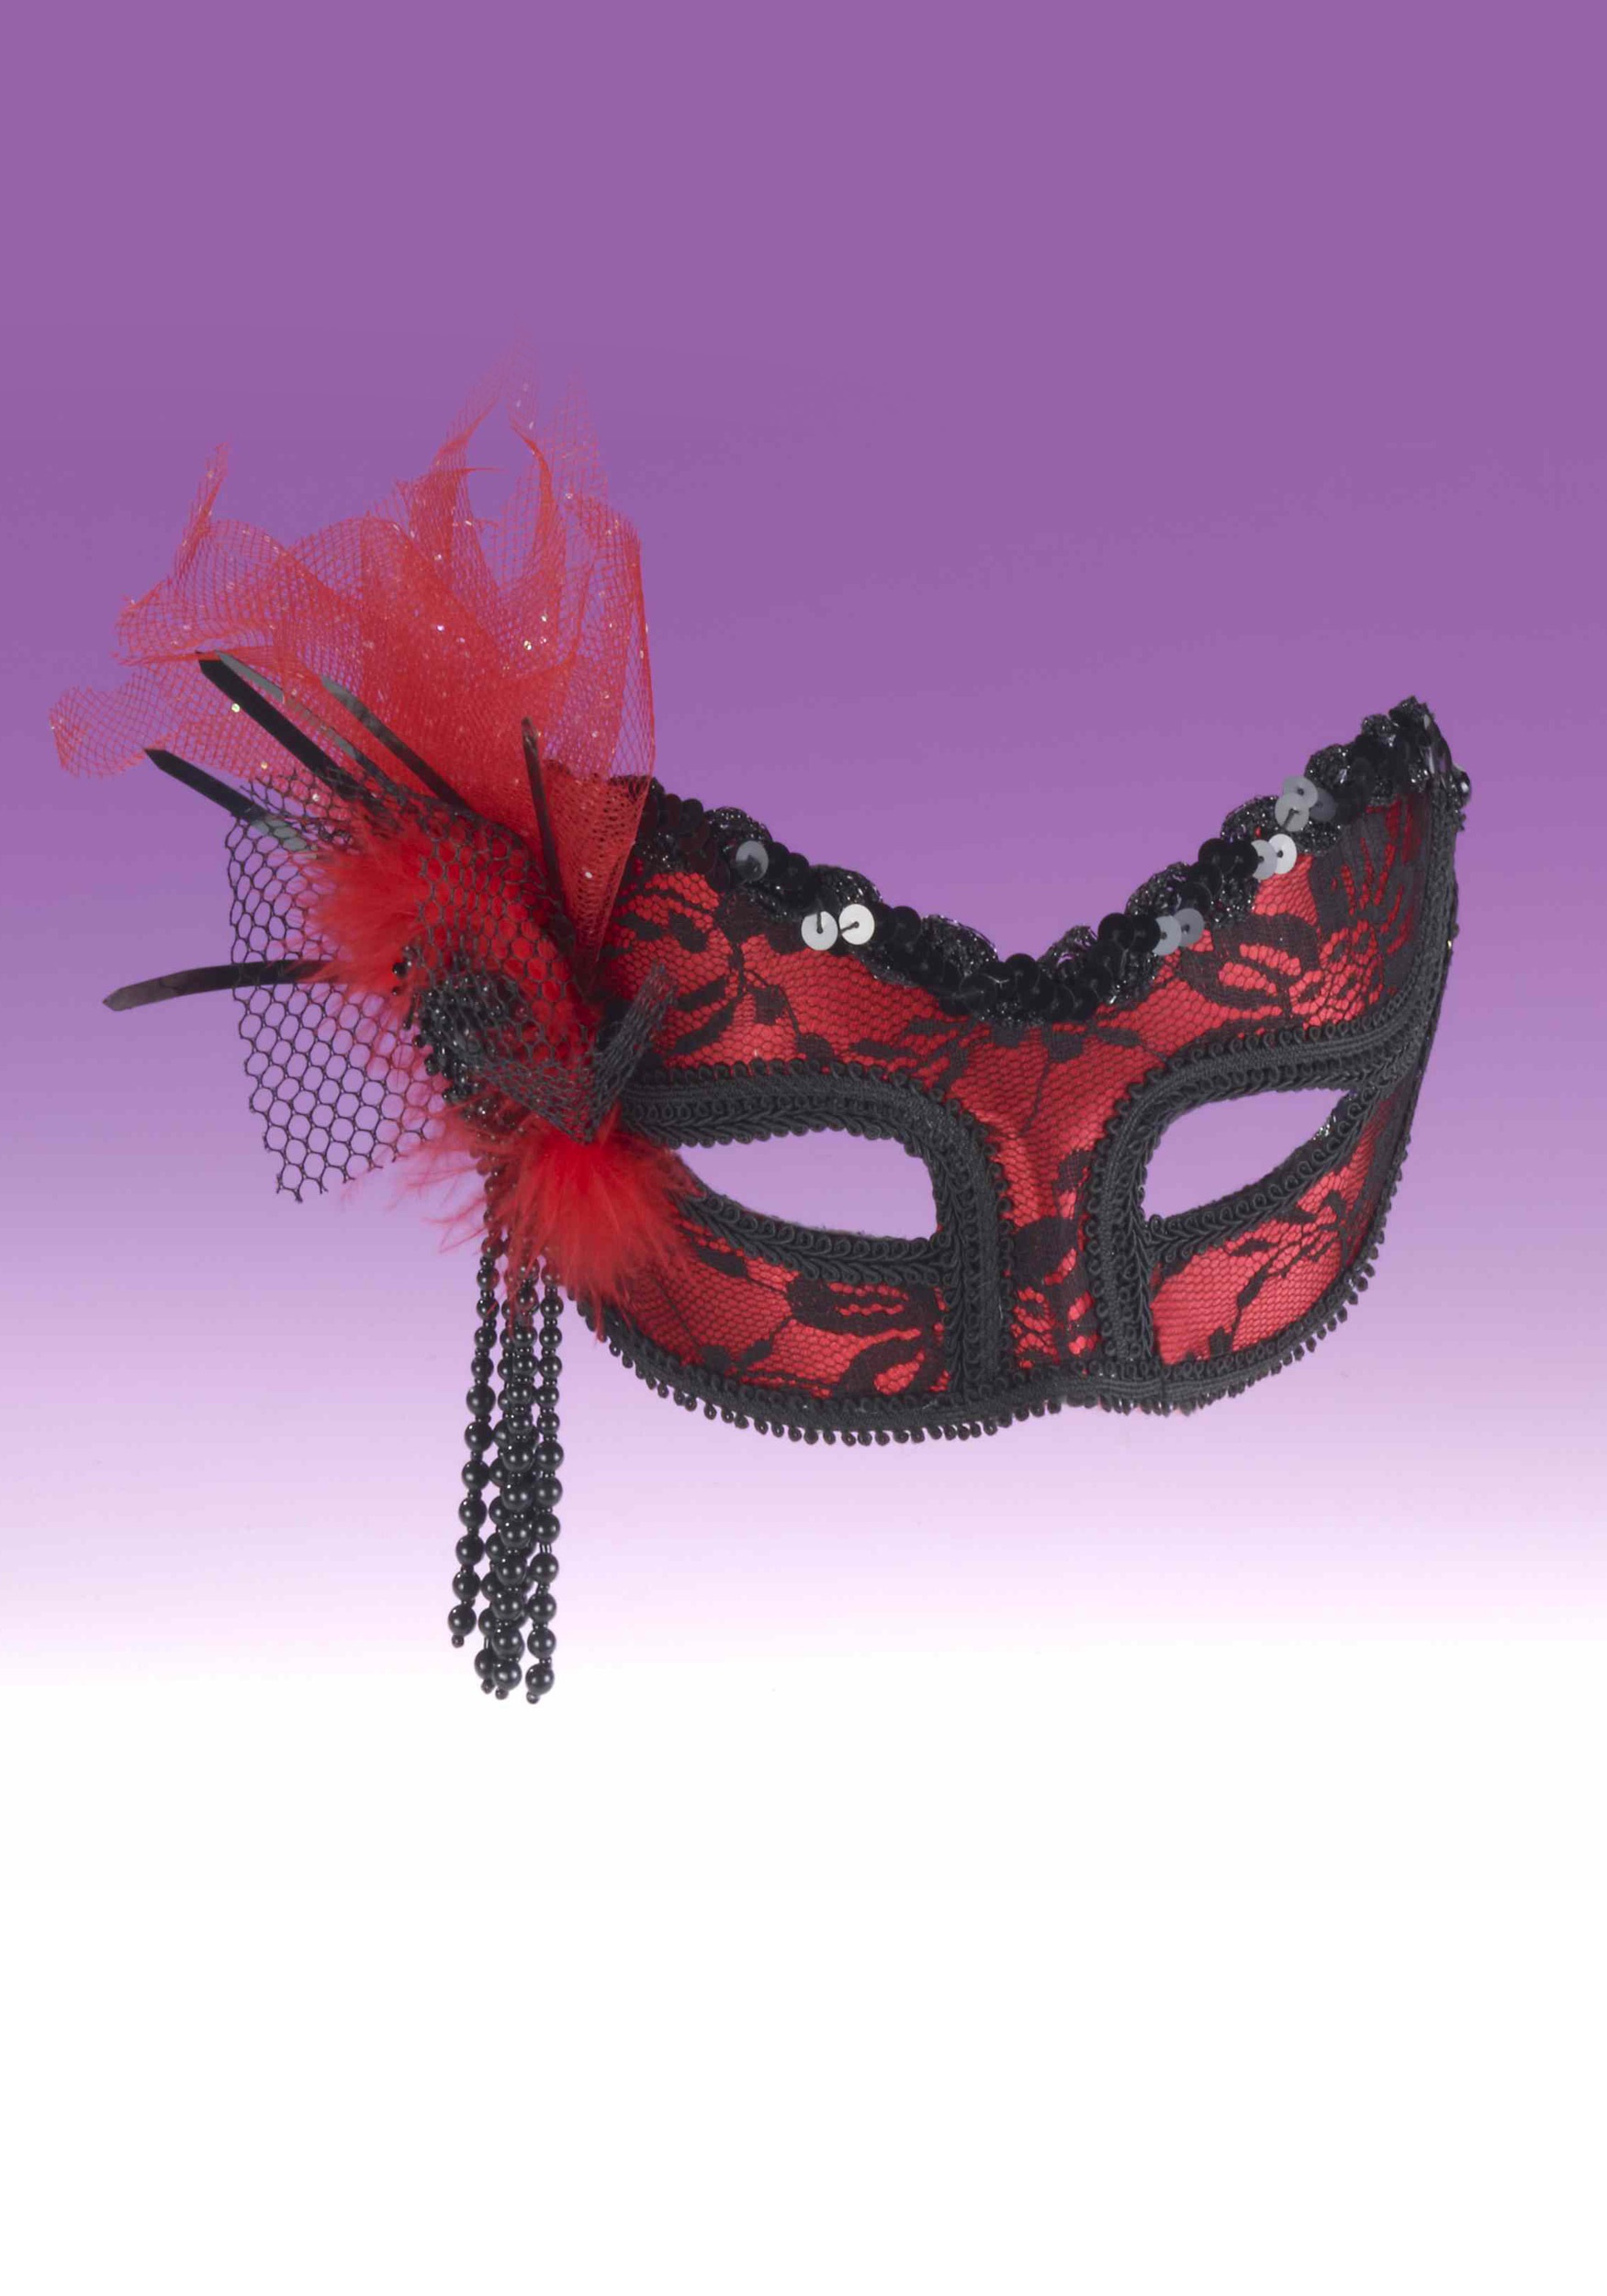 Red Black Lace Half Mask for Women